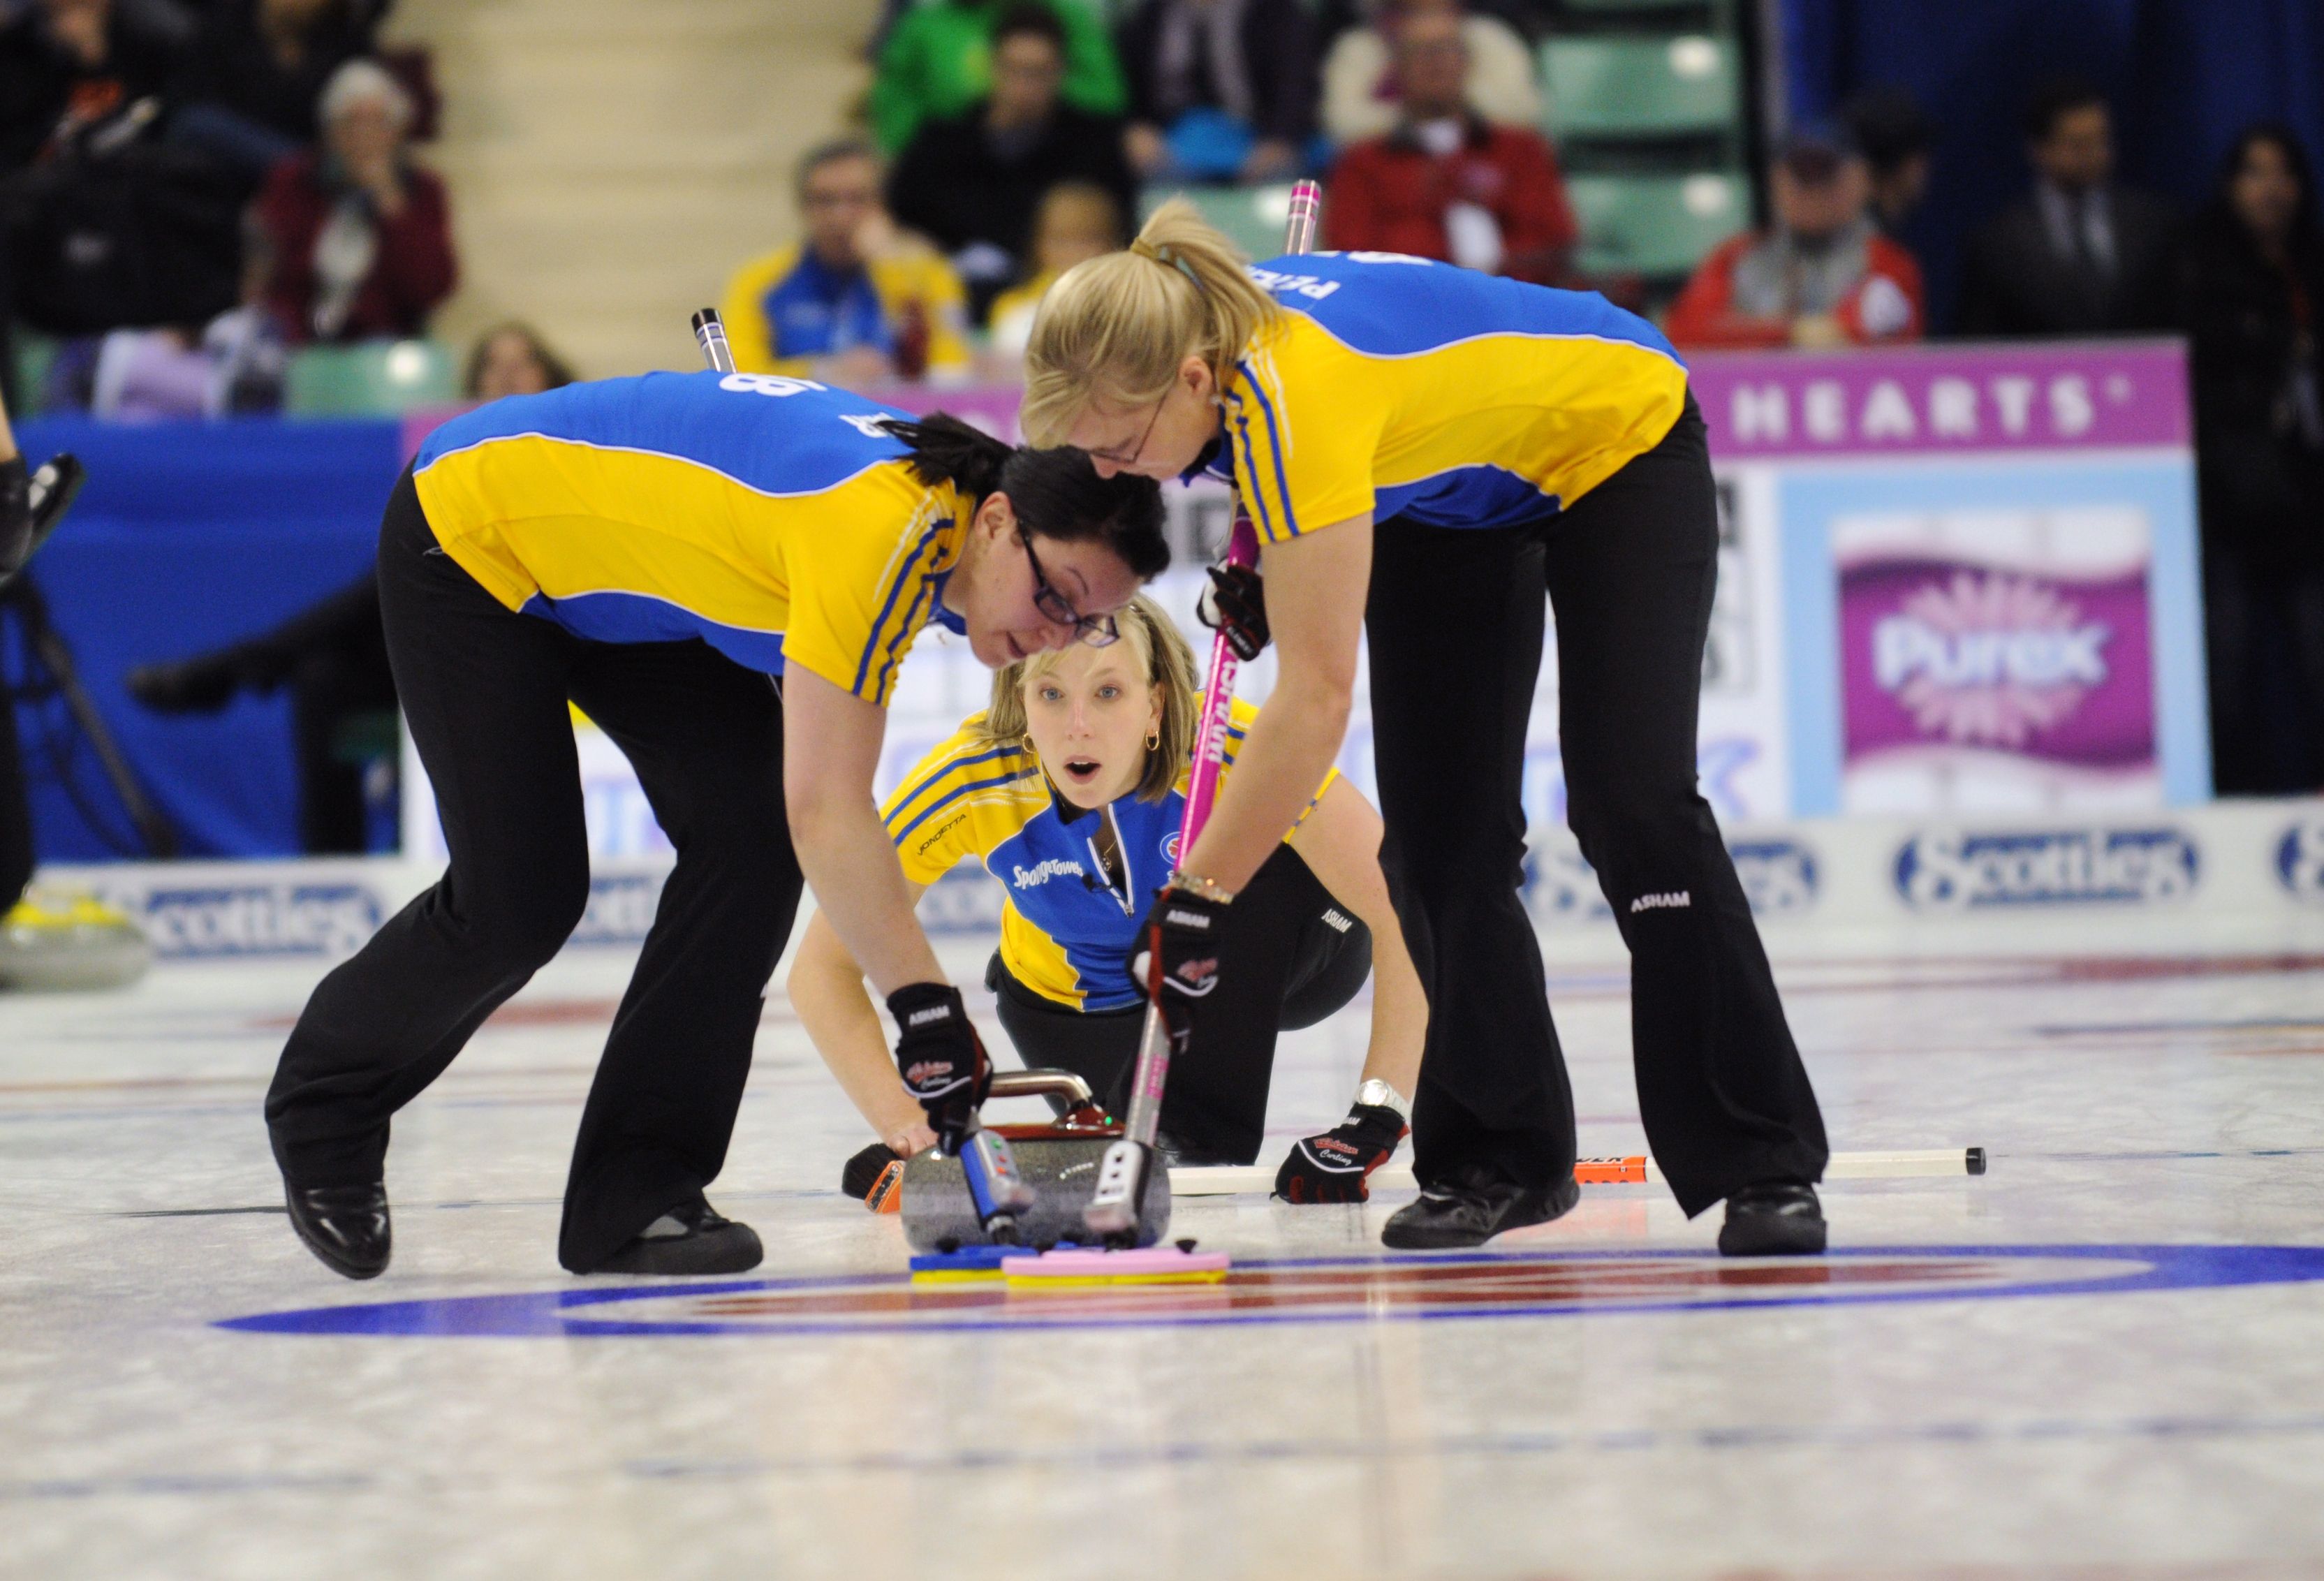 GREAT WIN- The Alberta Curling Team was victorious this past week as they won the Scotties Tournament of Hearts.